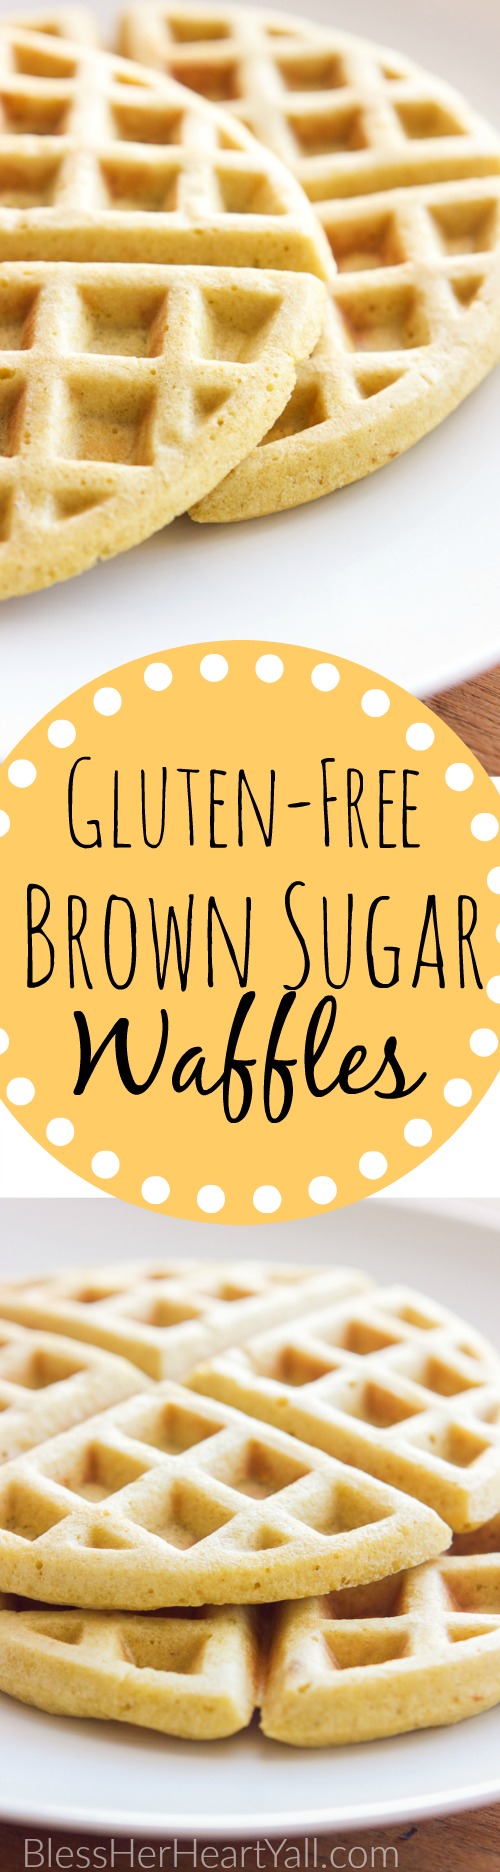 Yum!  These gluten-free brown sugar waffles are fluffy, soft, with a hint of brown sugar.  A gluten-free 5-minute breakfast never tasted so good!